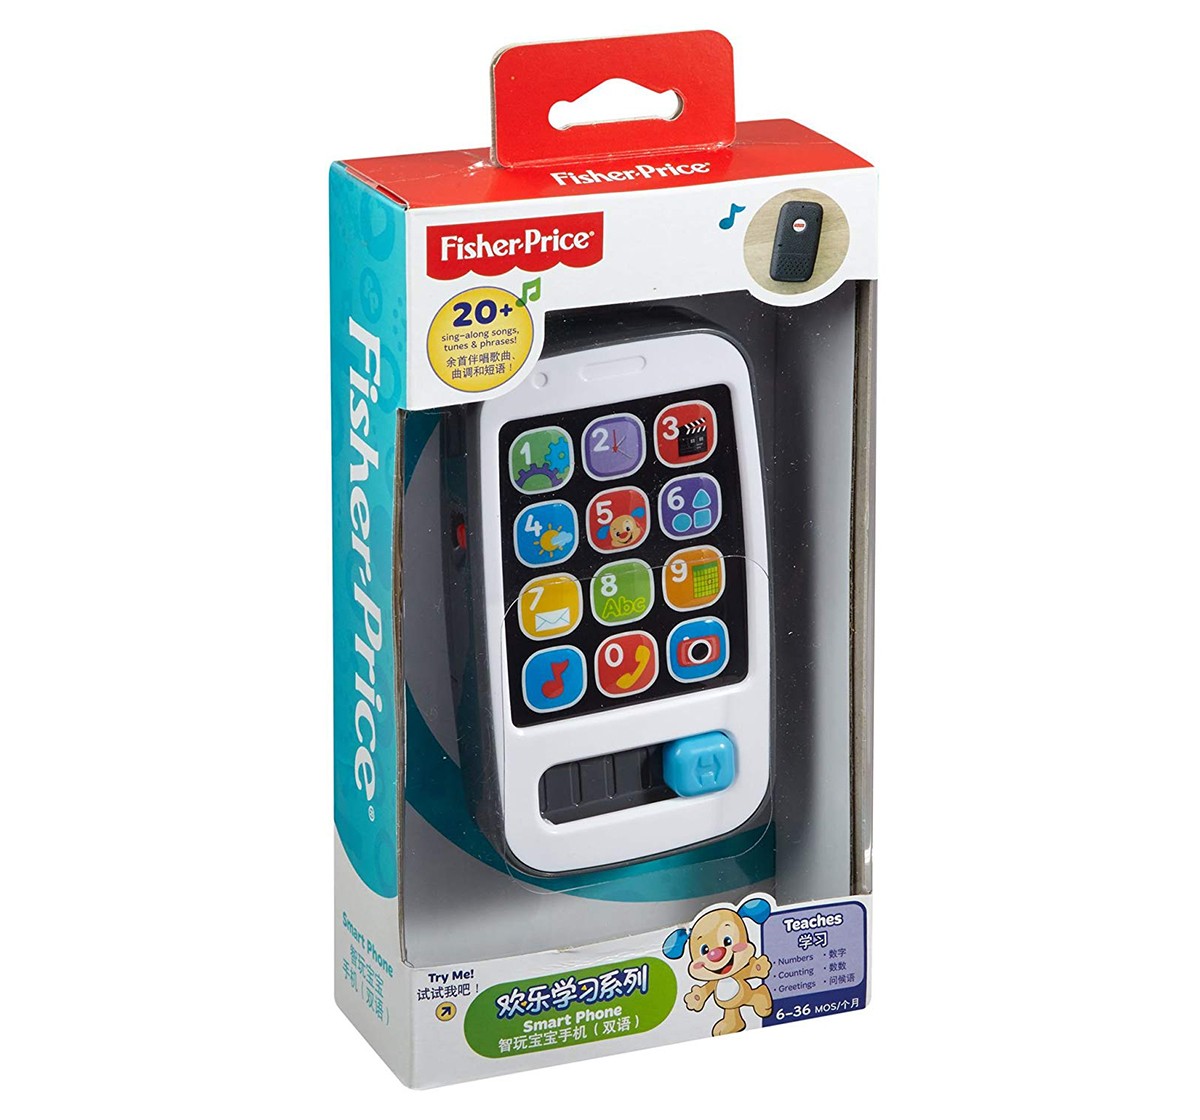 Fisher Price Laugh And Learn Smart Phone Learning Toys for Kids age 6M+ 